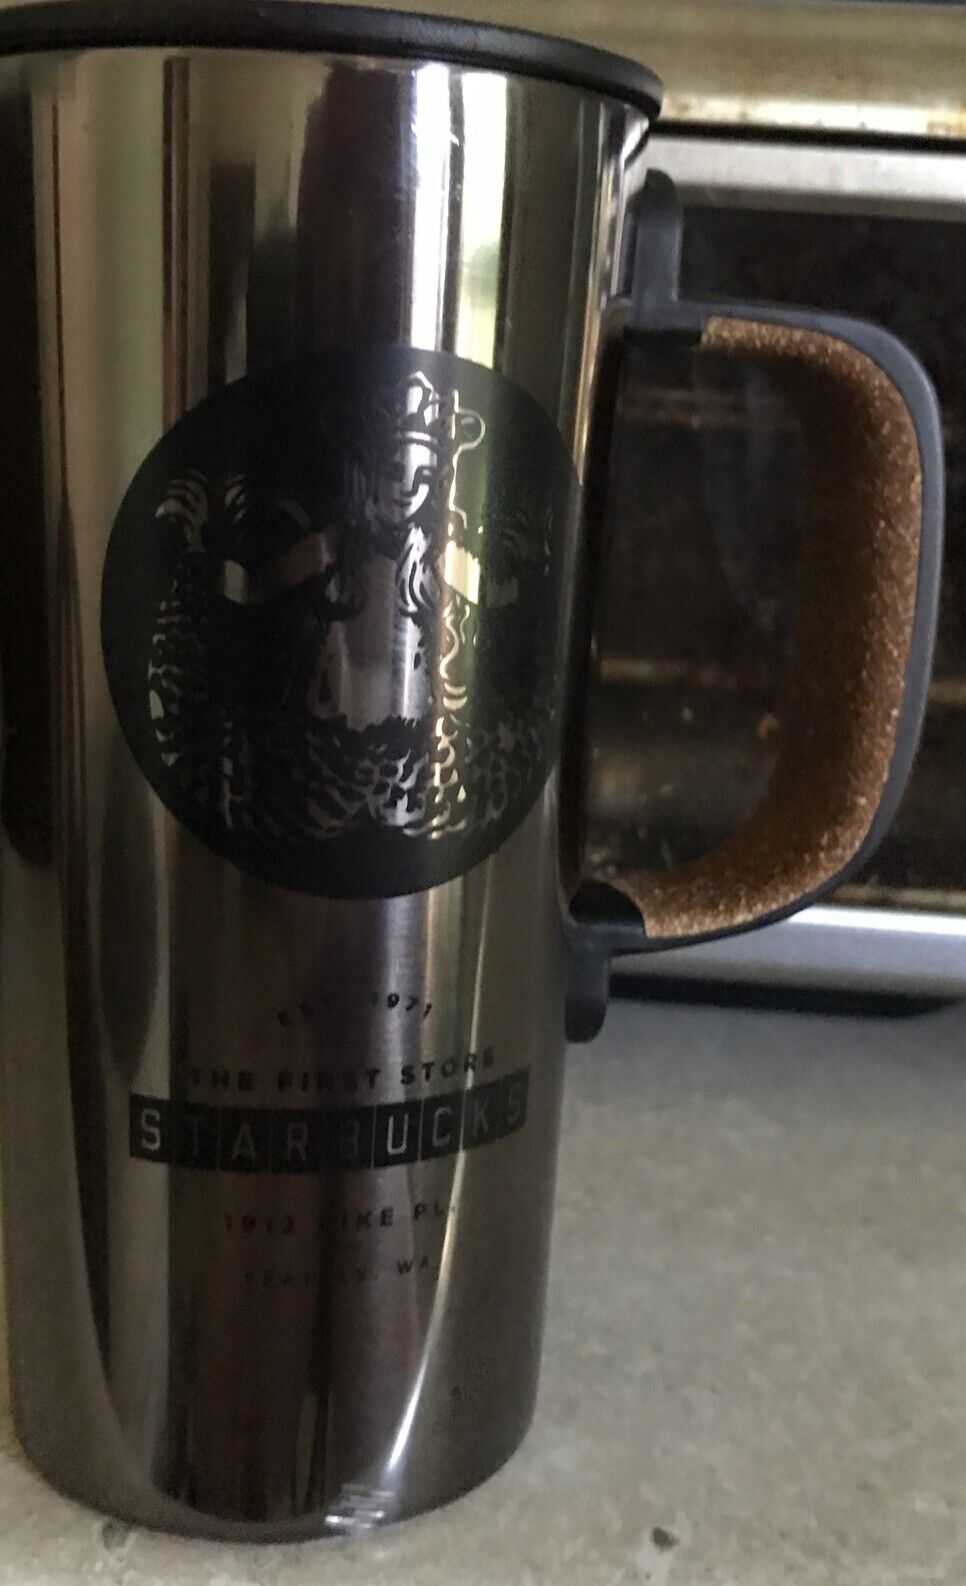 Starbucks PIKE PLACE MARKET Seattle FIRST STORE Stainless Steel 12oz Tumbler